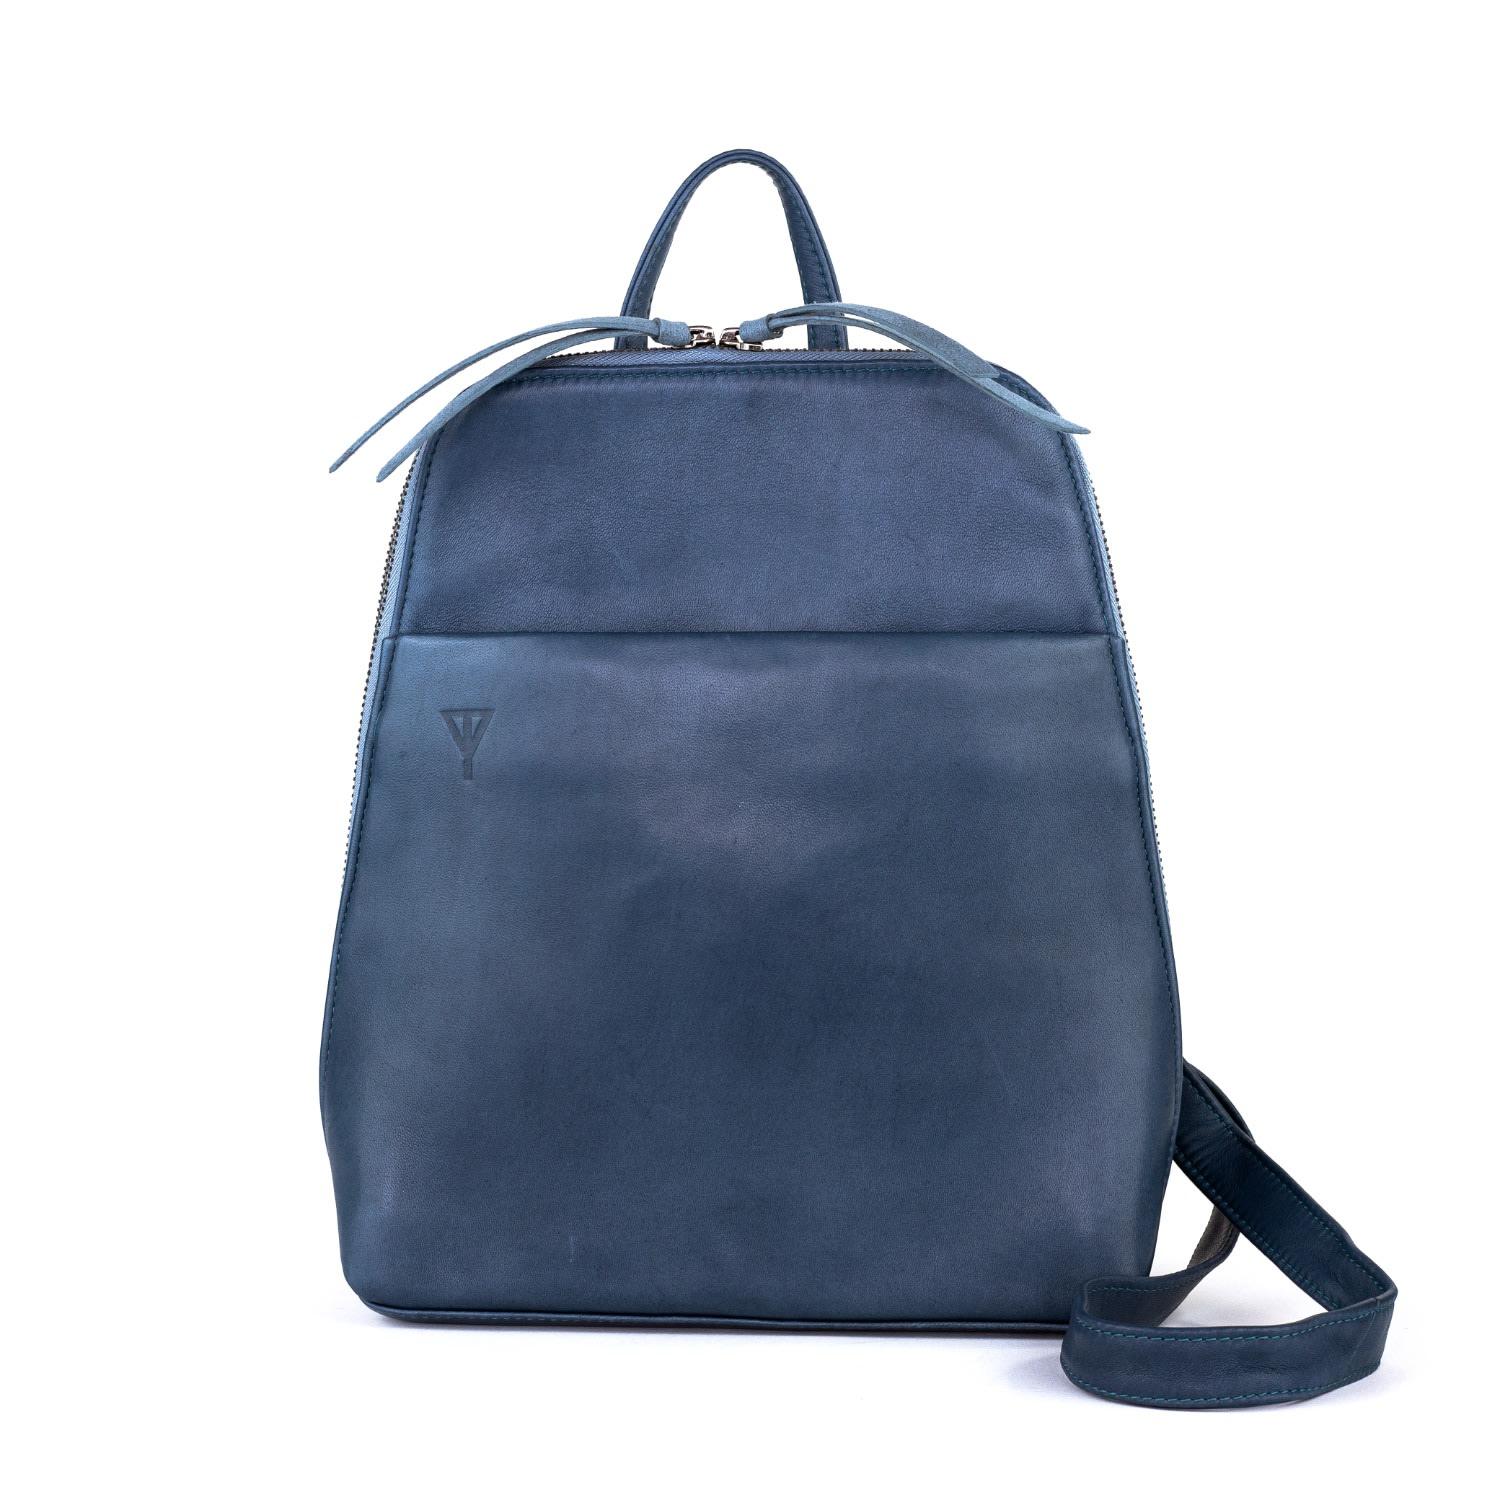 Taylor Yates Bessie Backpack In Petrol in Blue | Lyst Canada